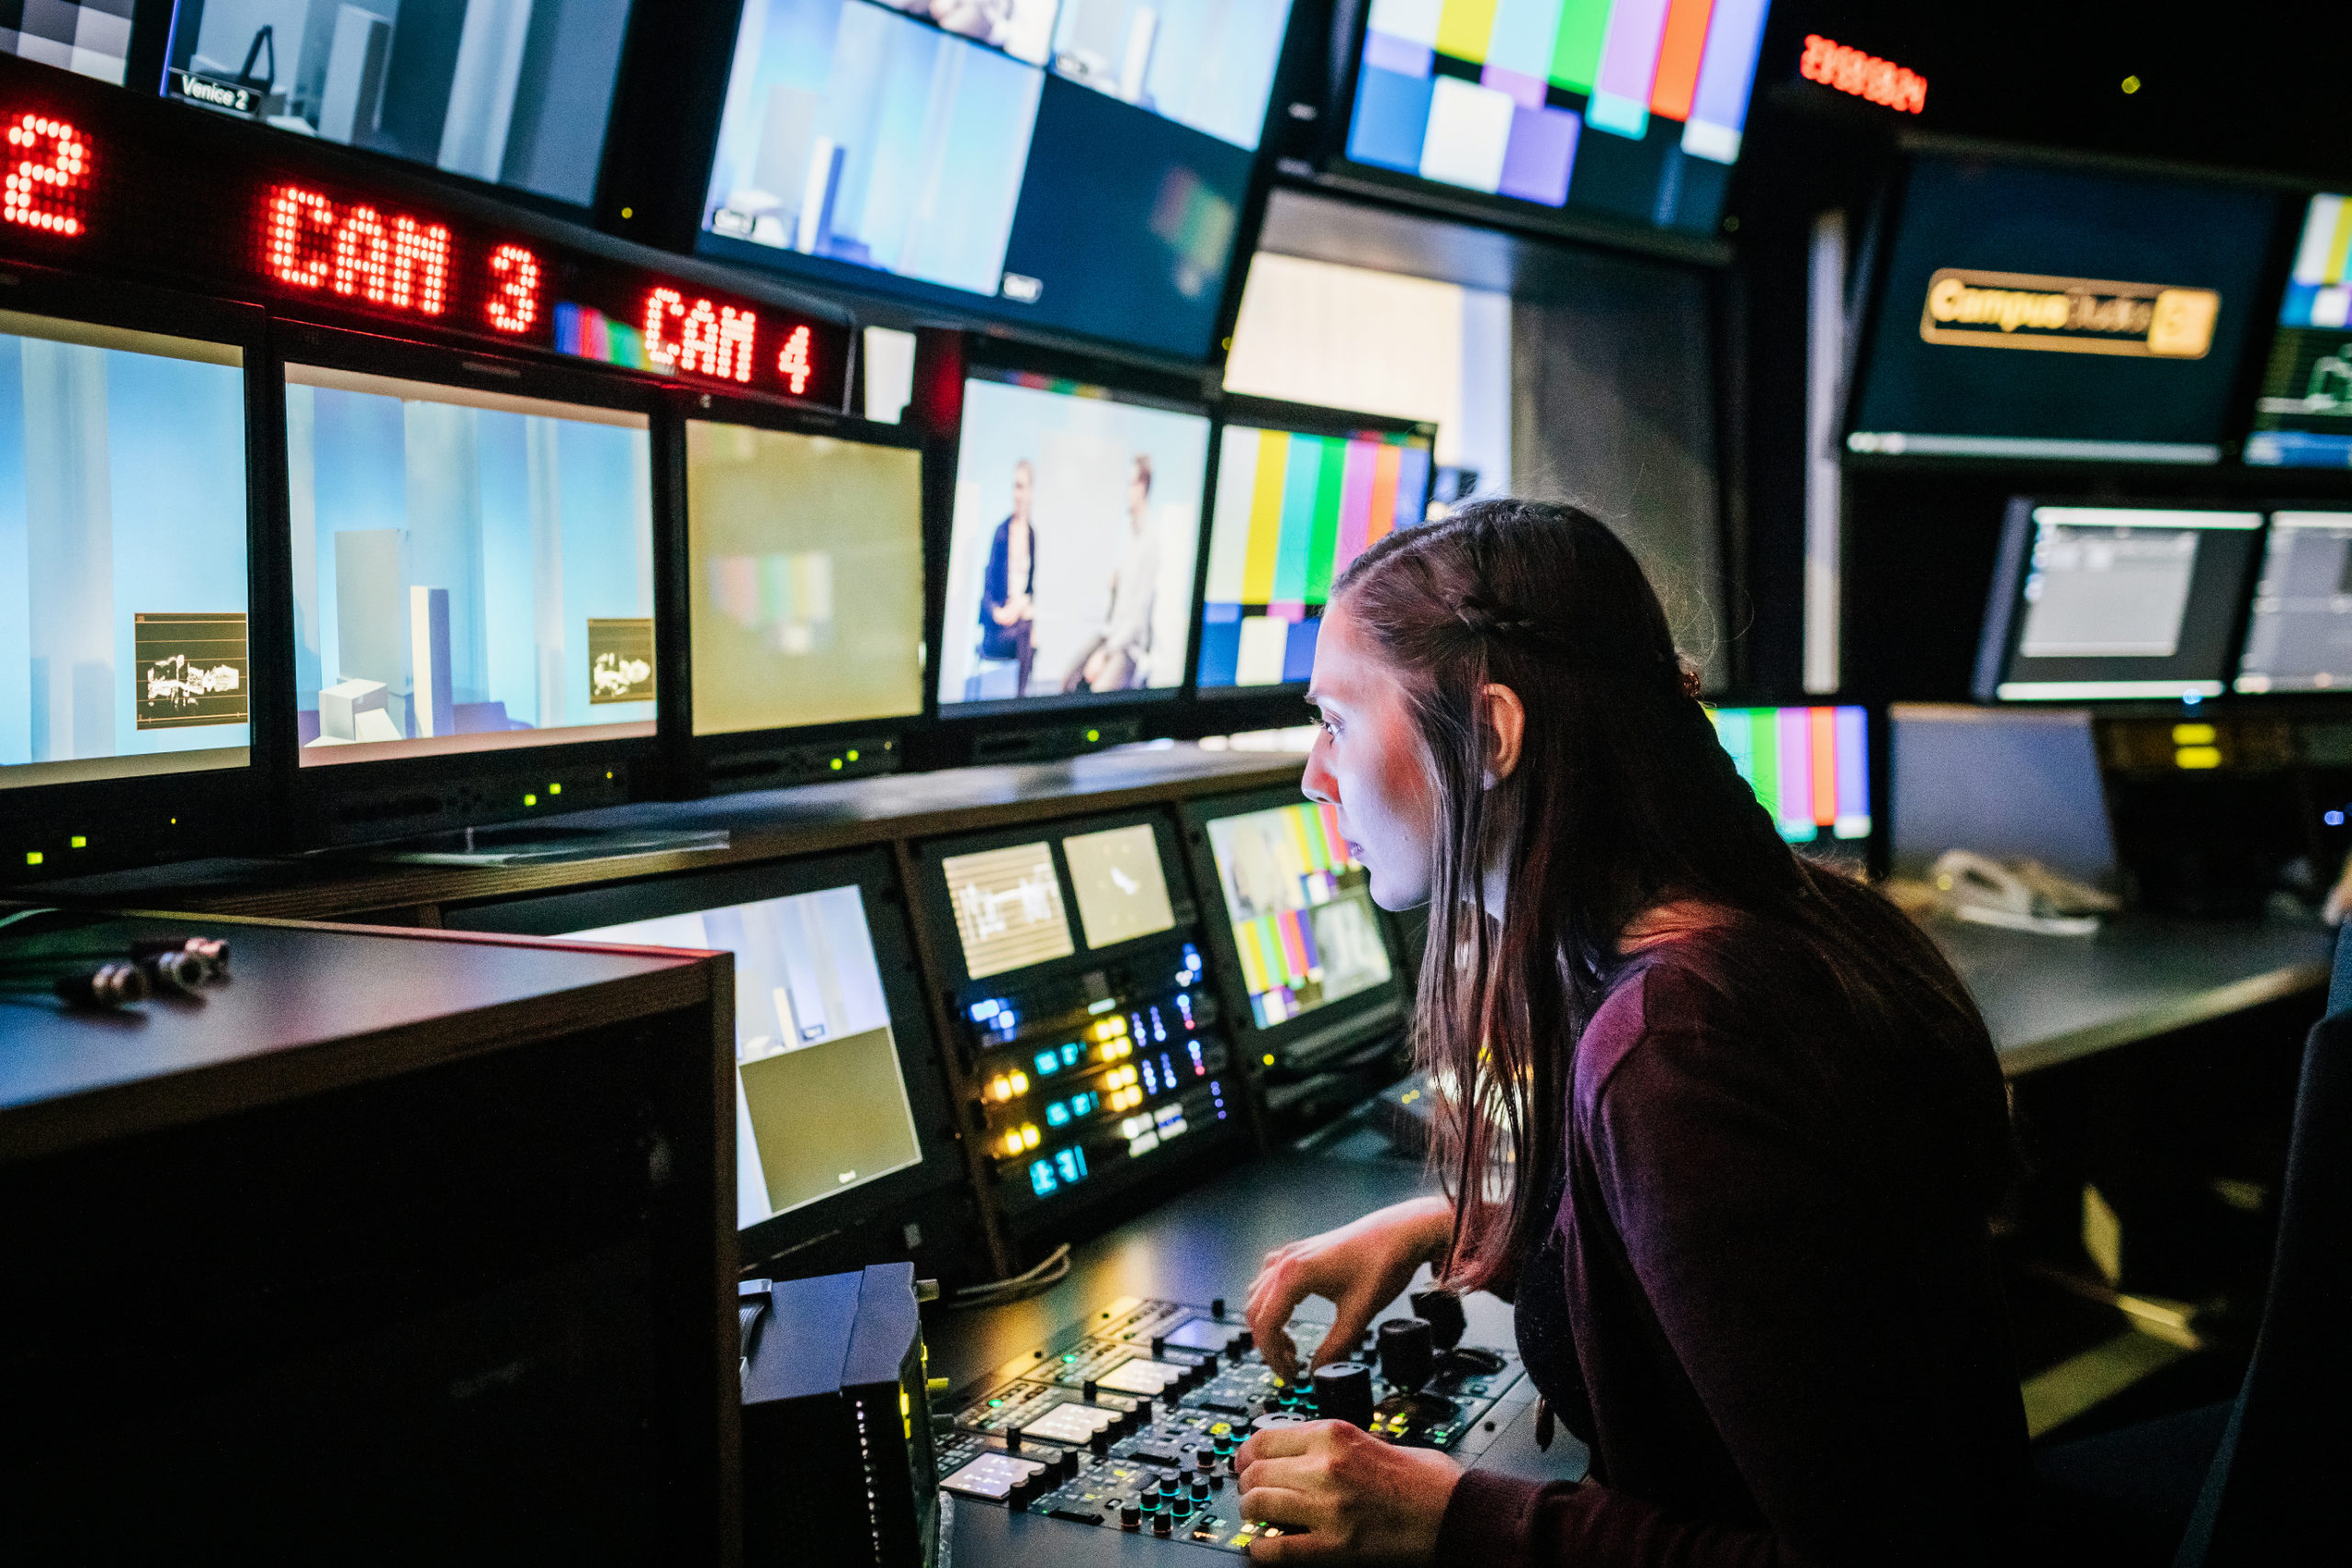 A university student looking at various screens while using tv studio equipment.